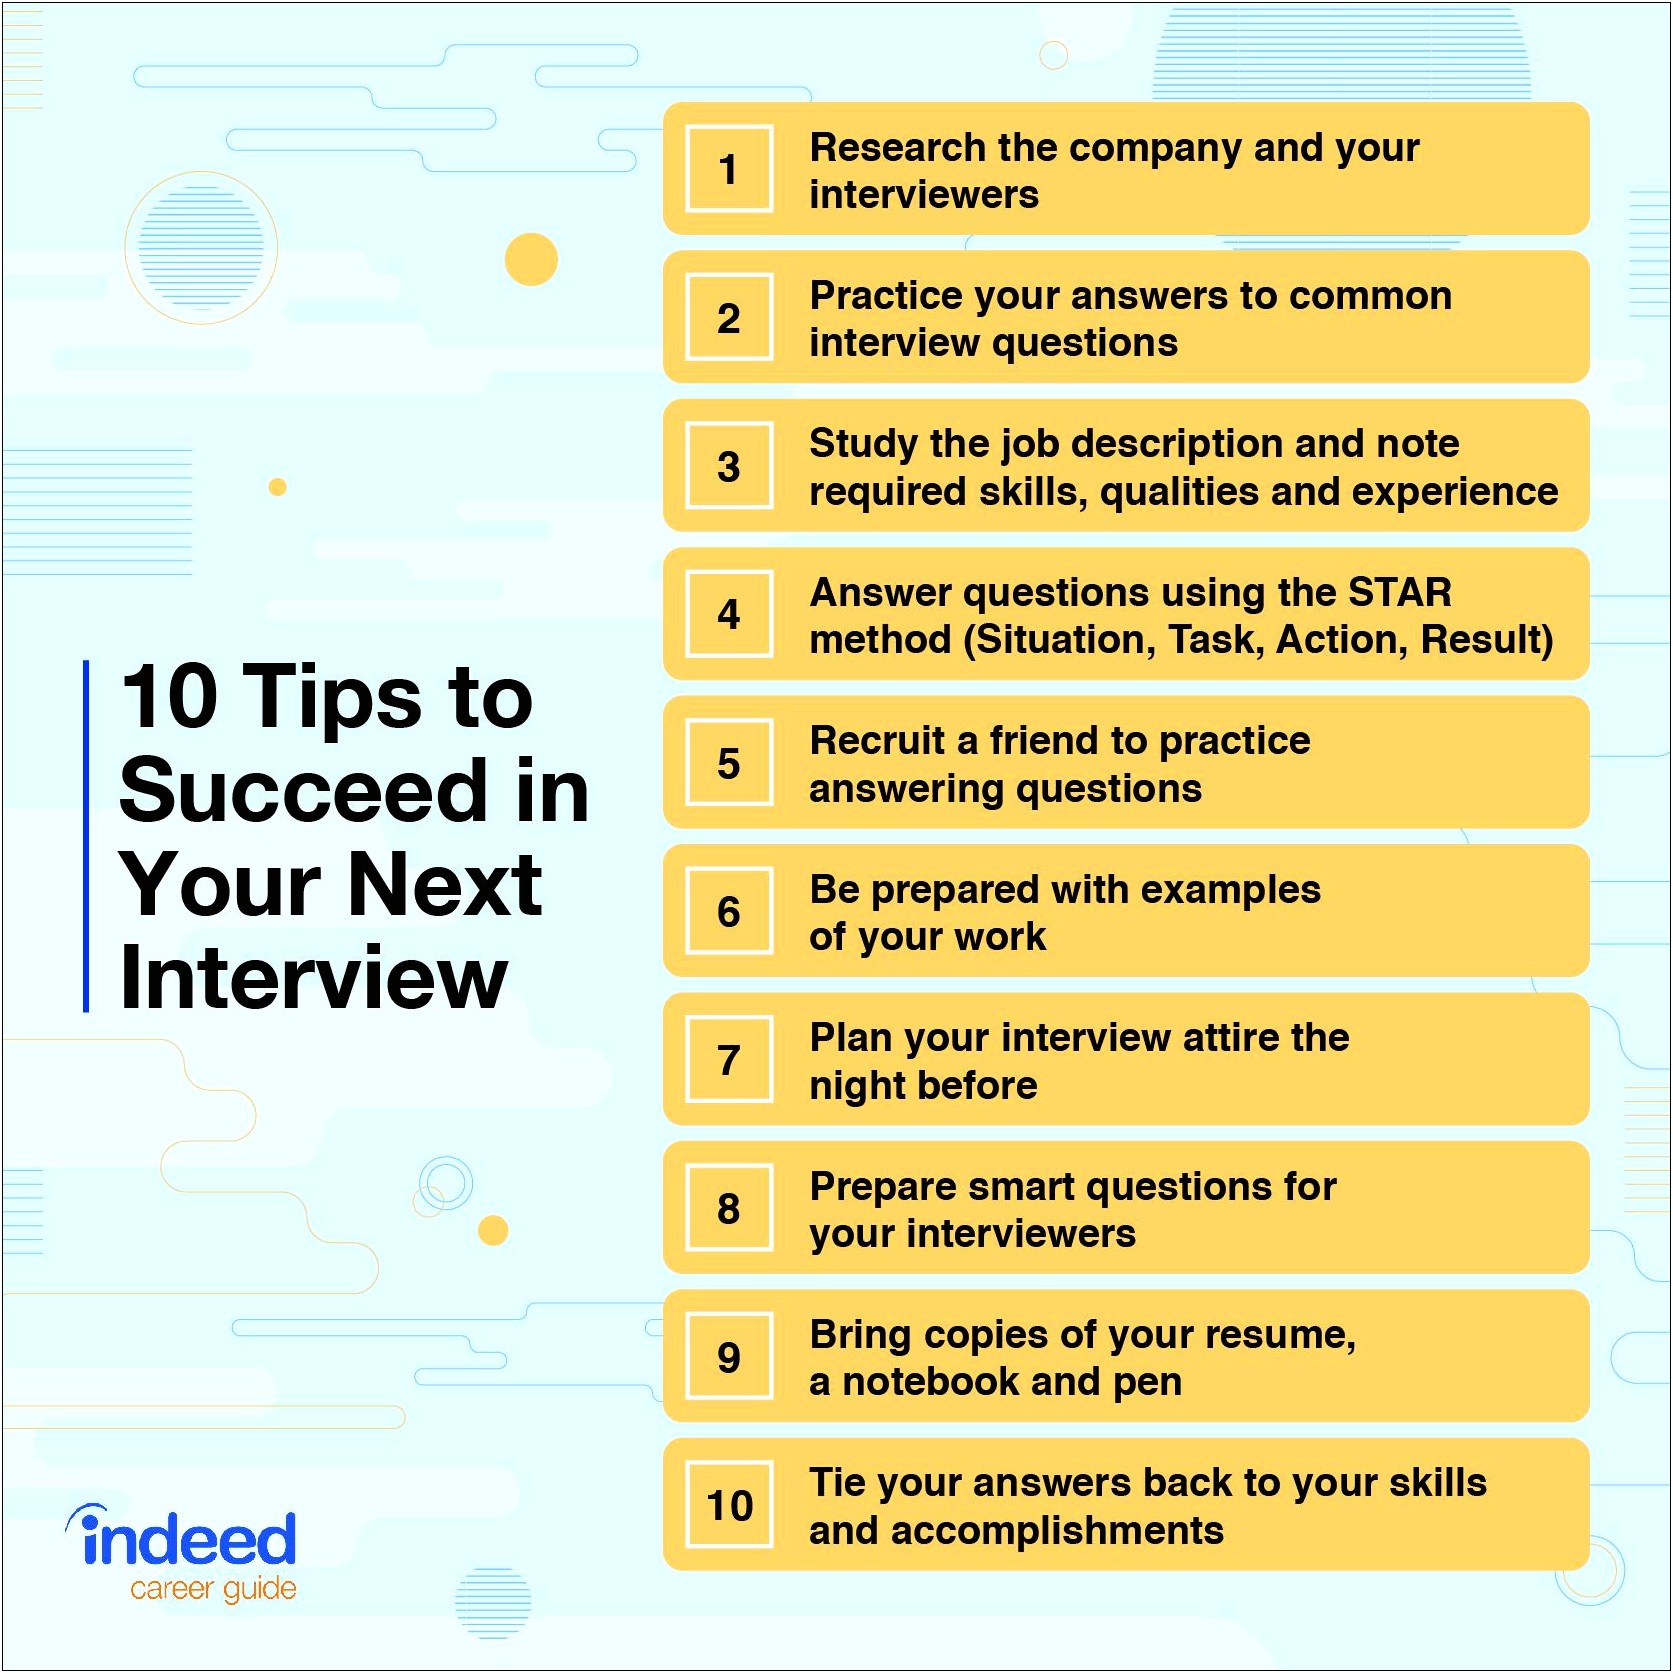 During Interviewing Talking About Job Not On Resume